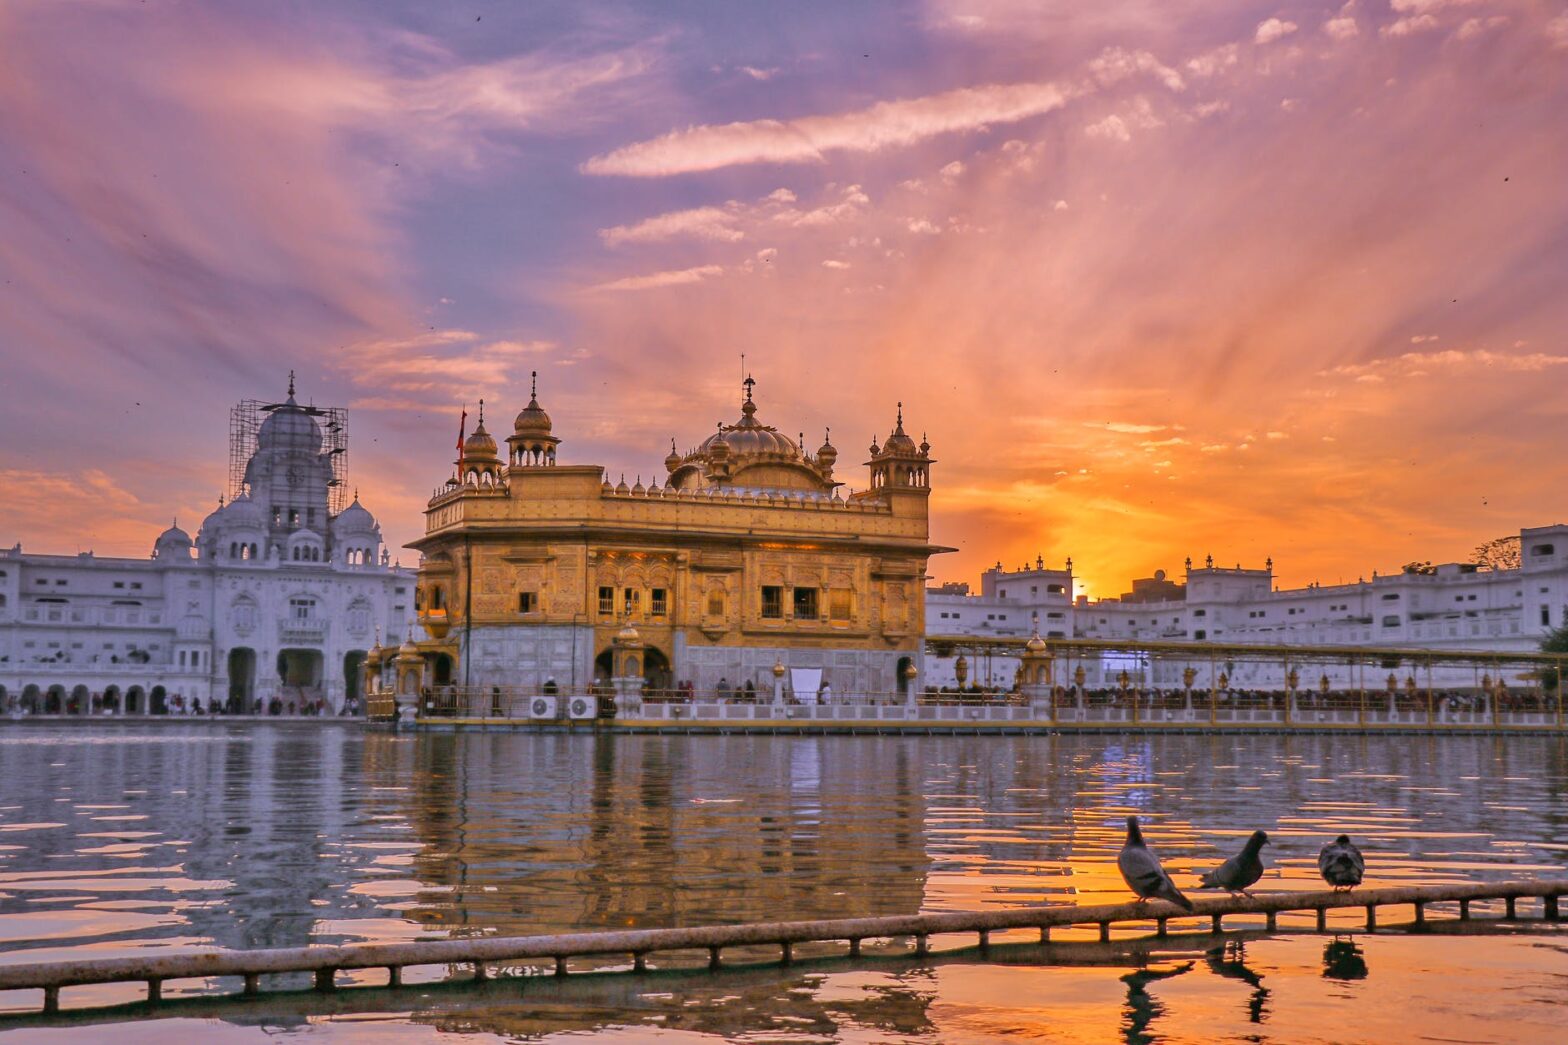 golden temple near water in evening